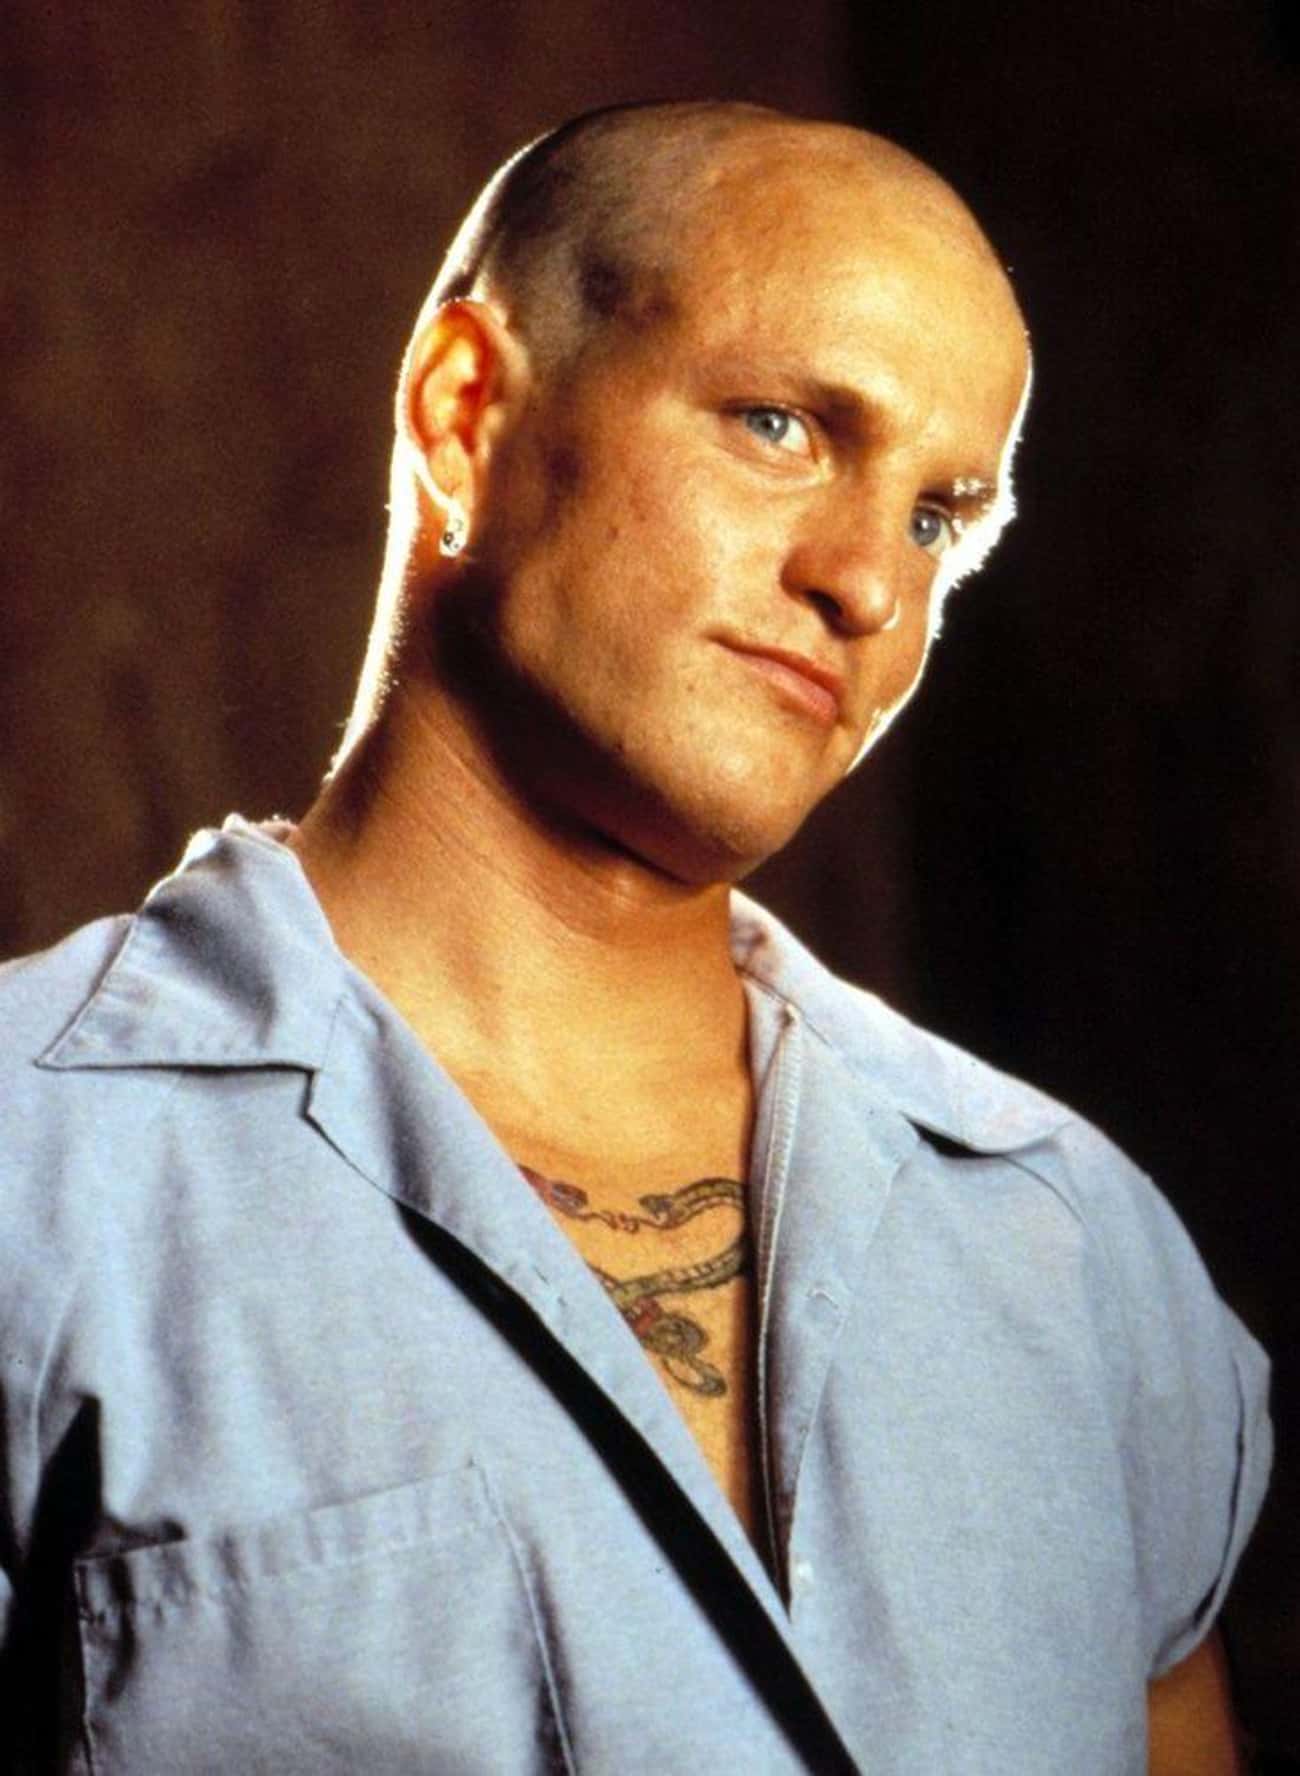 Woody Harrelson Showed A Shocking Dark Side As A Serial Killer In 'Natural Born Killers'